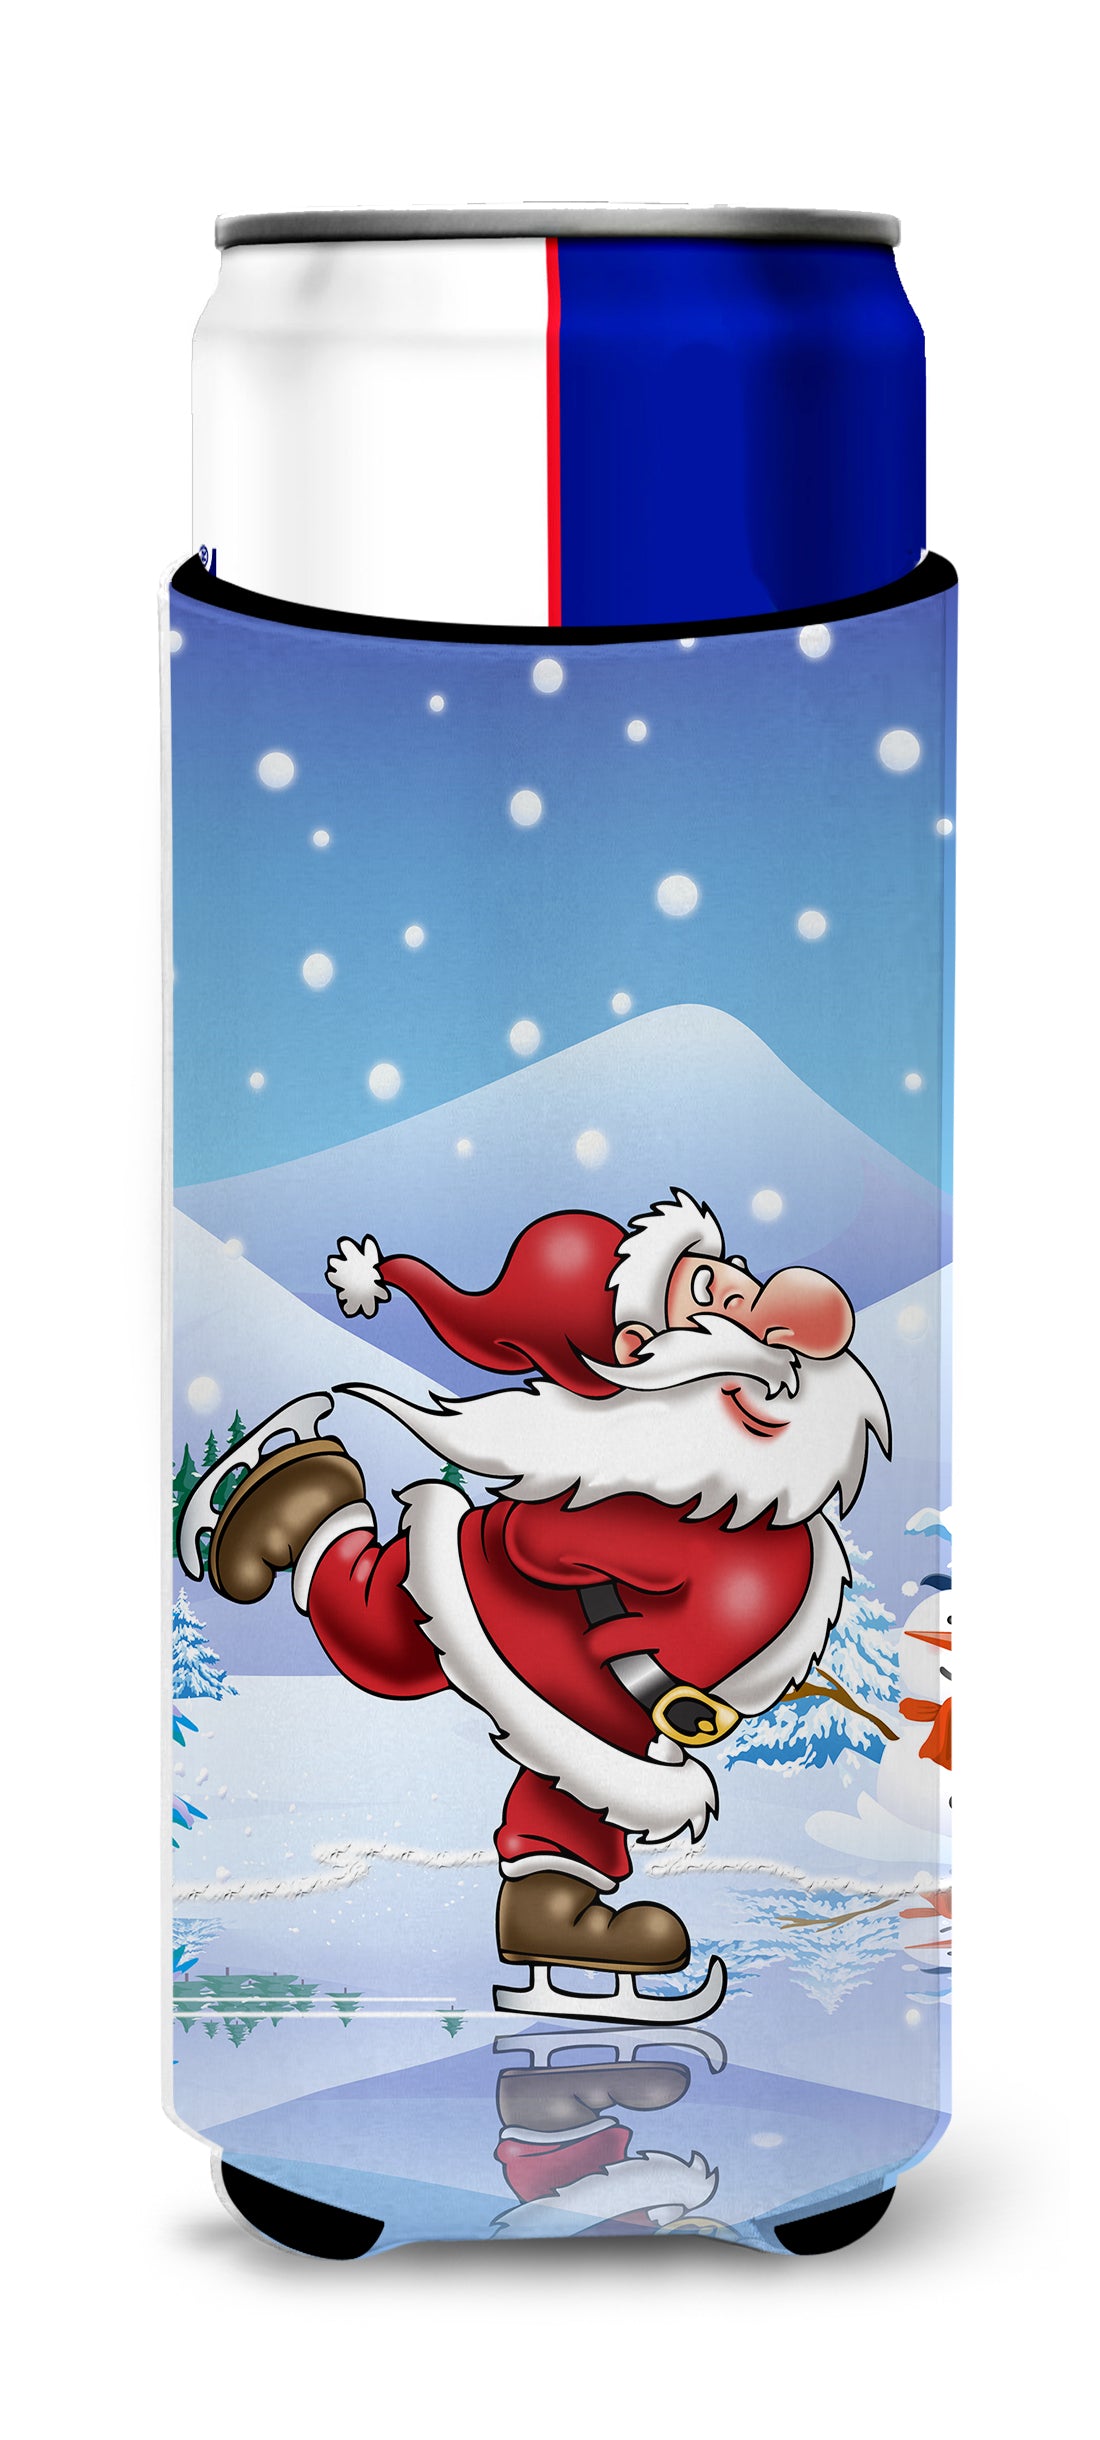 Christmas Santa Claus Ice Skating Ultra Beverage Insulators for slim cans APH6386MUK